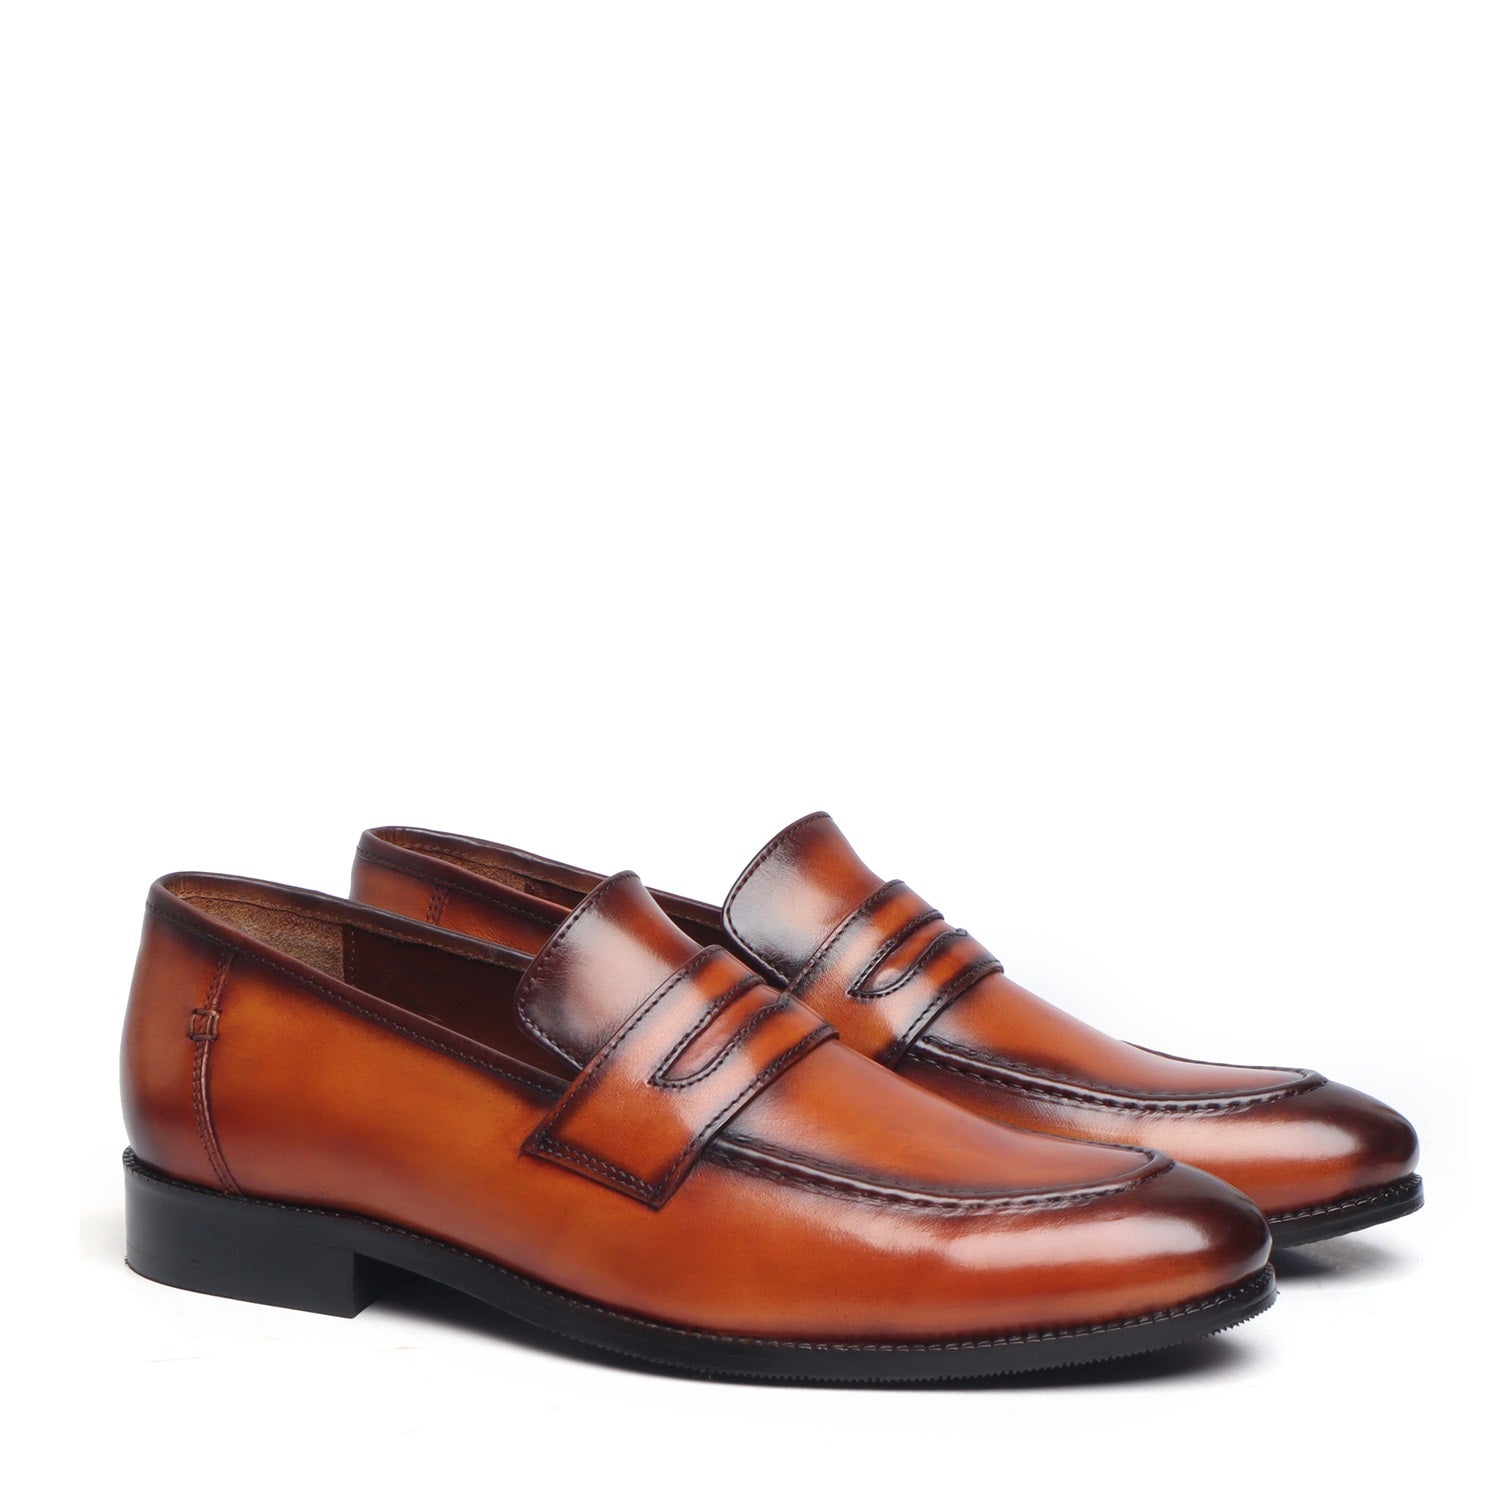 Burnished Tan Penny Loafers